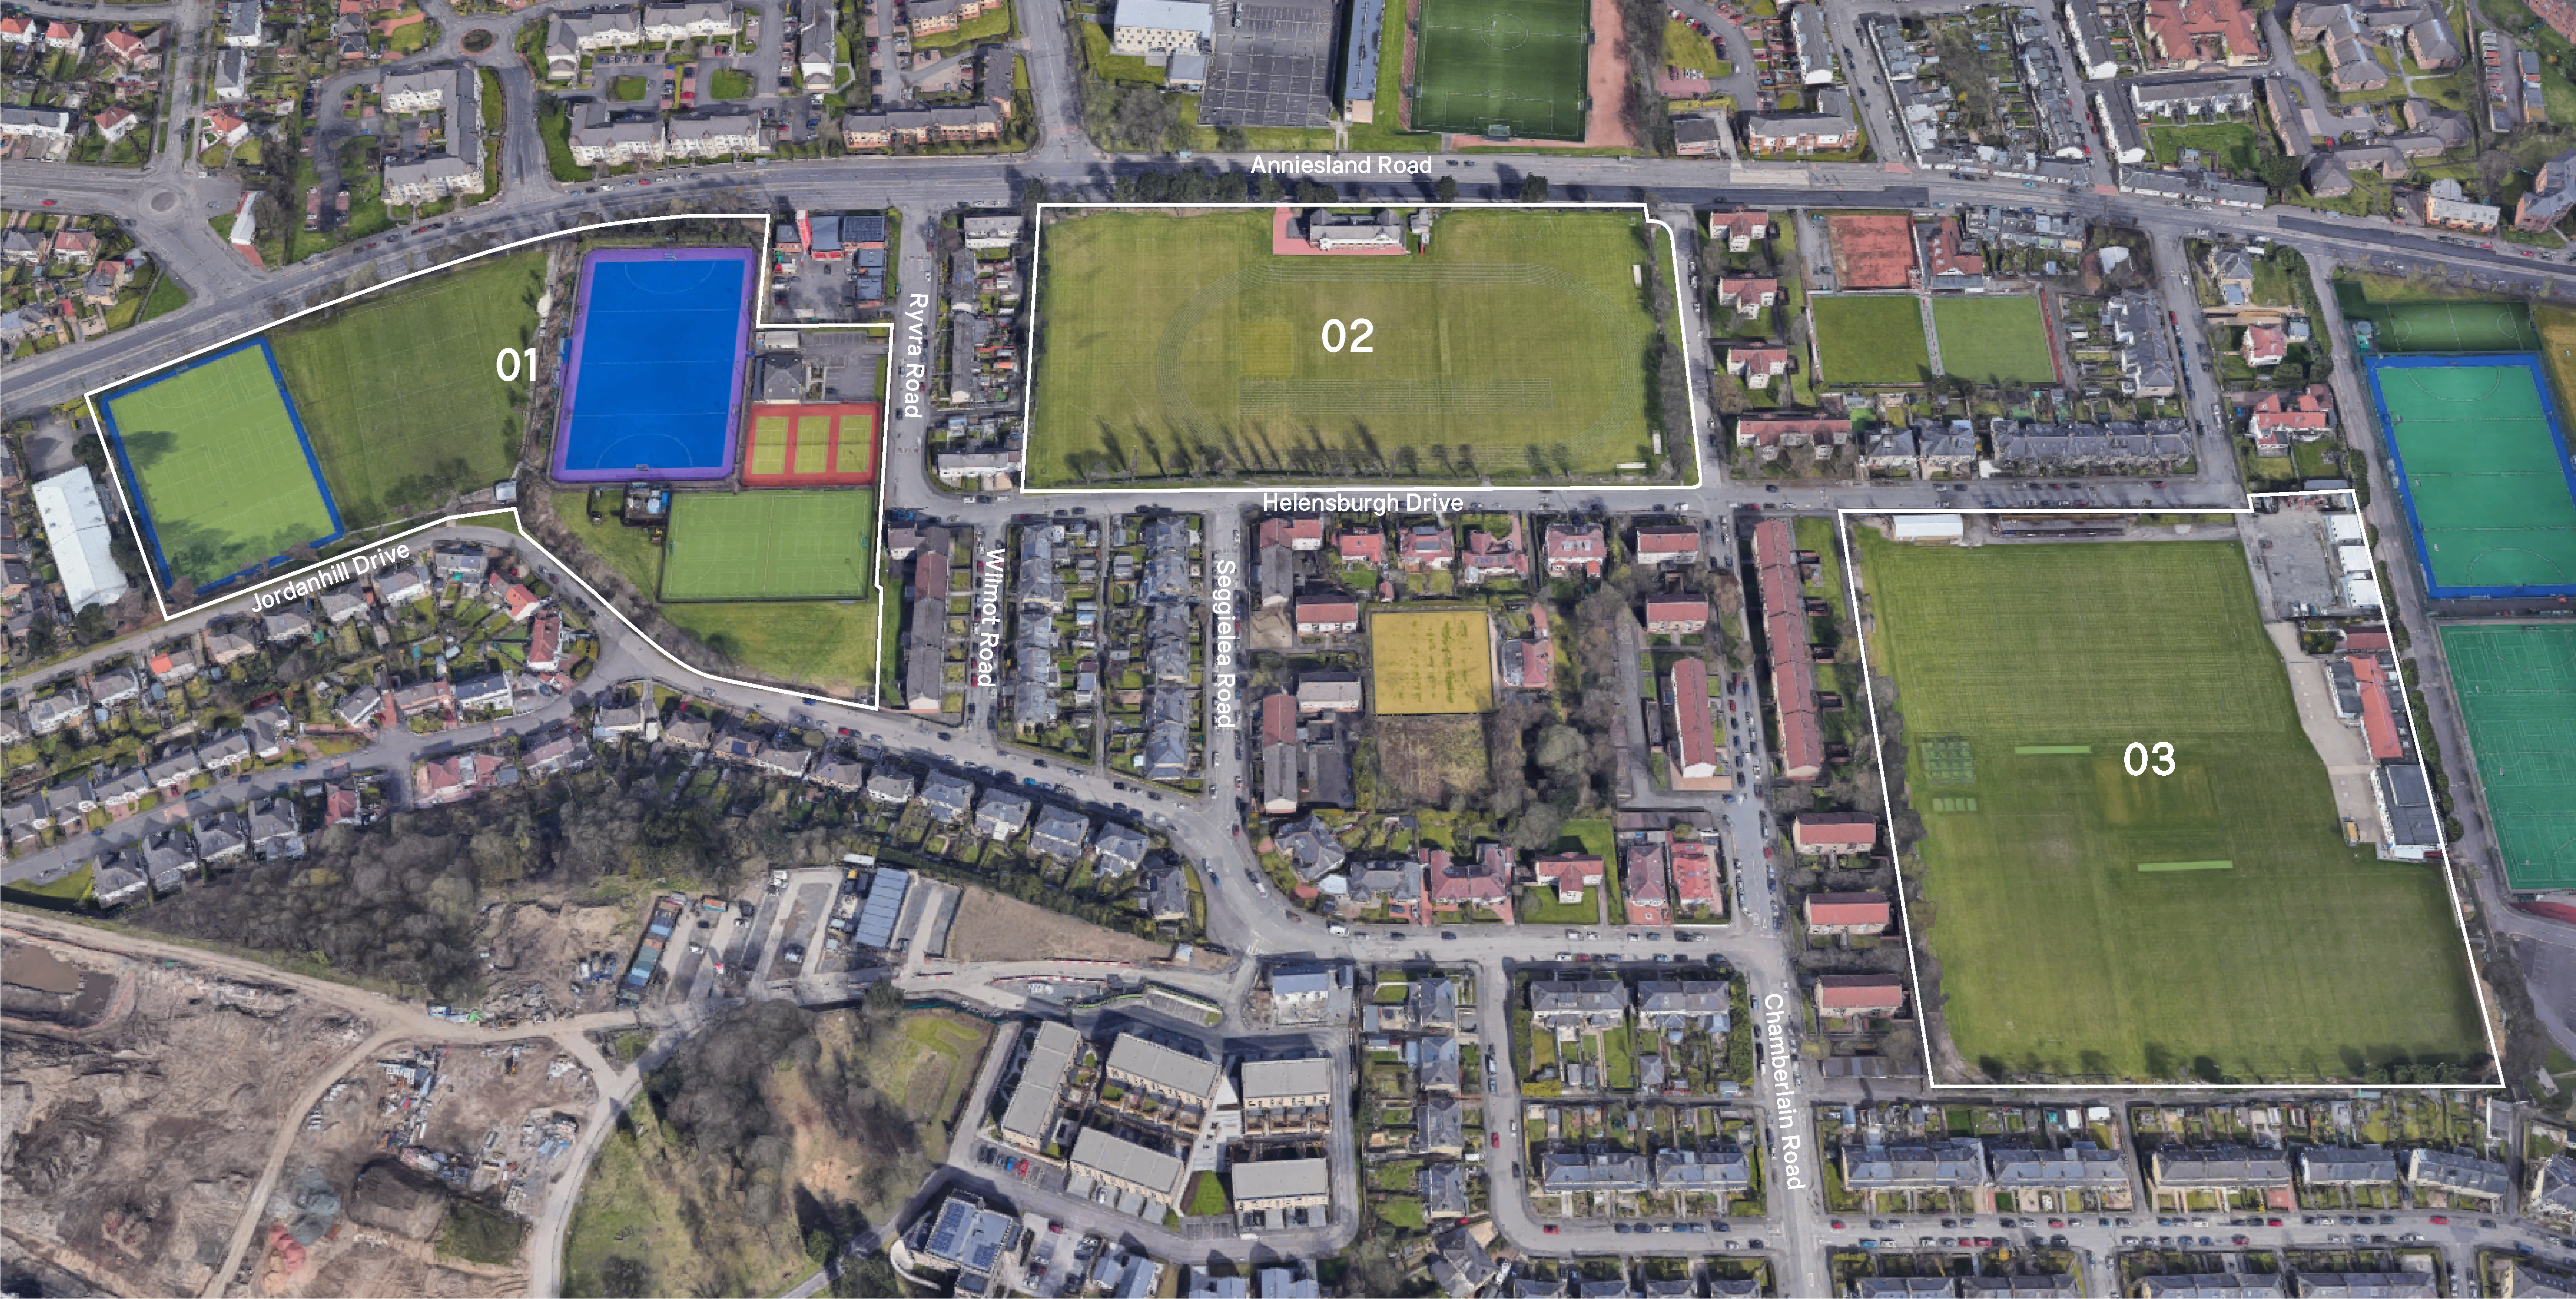 Plans to enhance Anniesland sporting campus submitted to Glasgow City Council